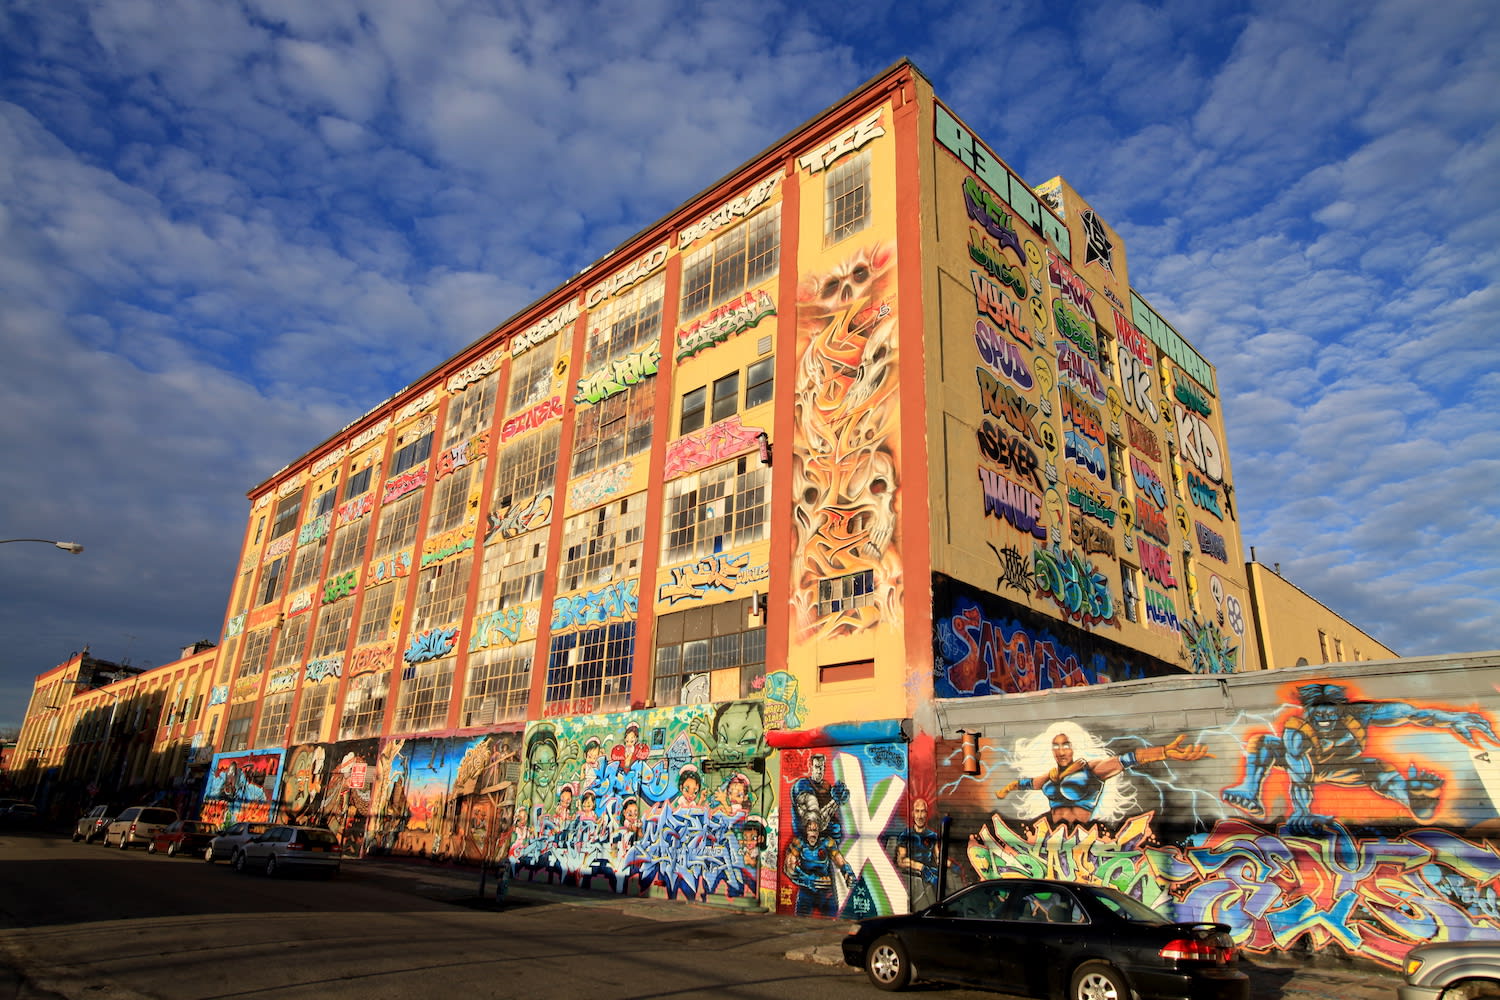 A Stunning Legal Decision Just Upheld a $6.75 Million Victory for the Street Artists Whose Works Were Destroyed at 5Pointz